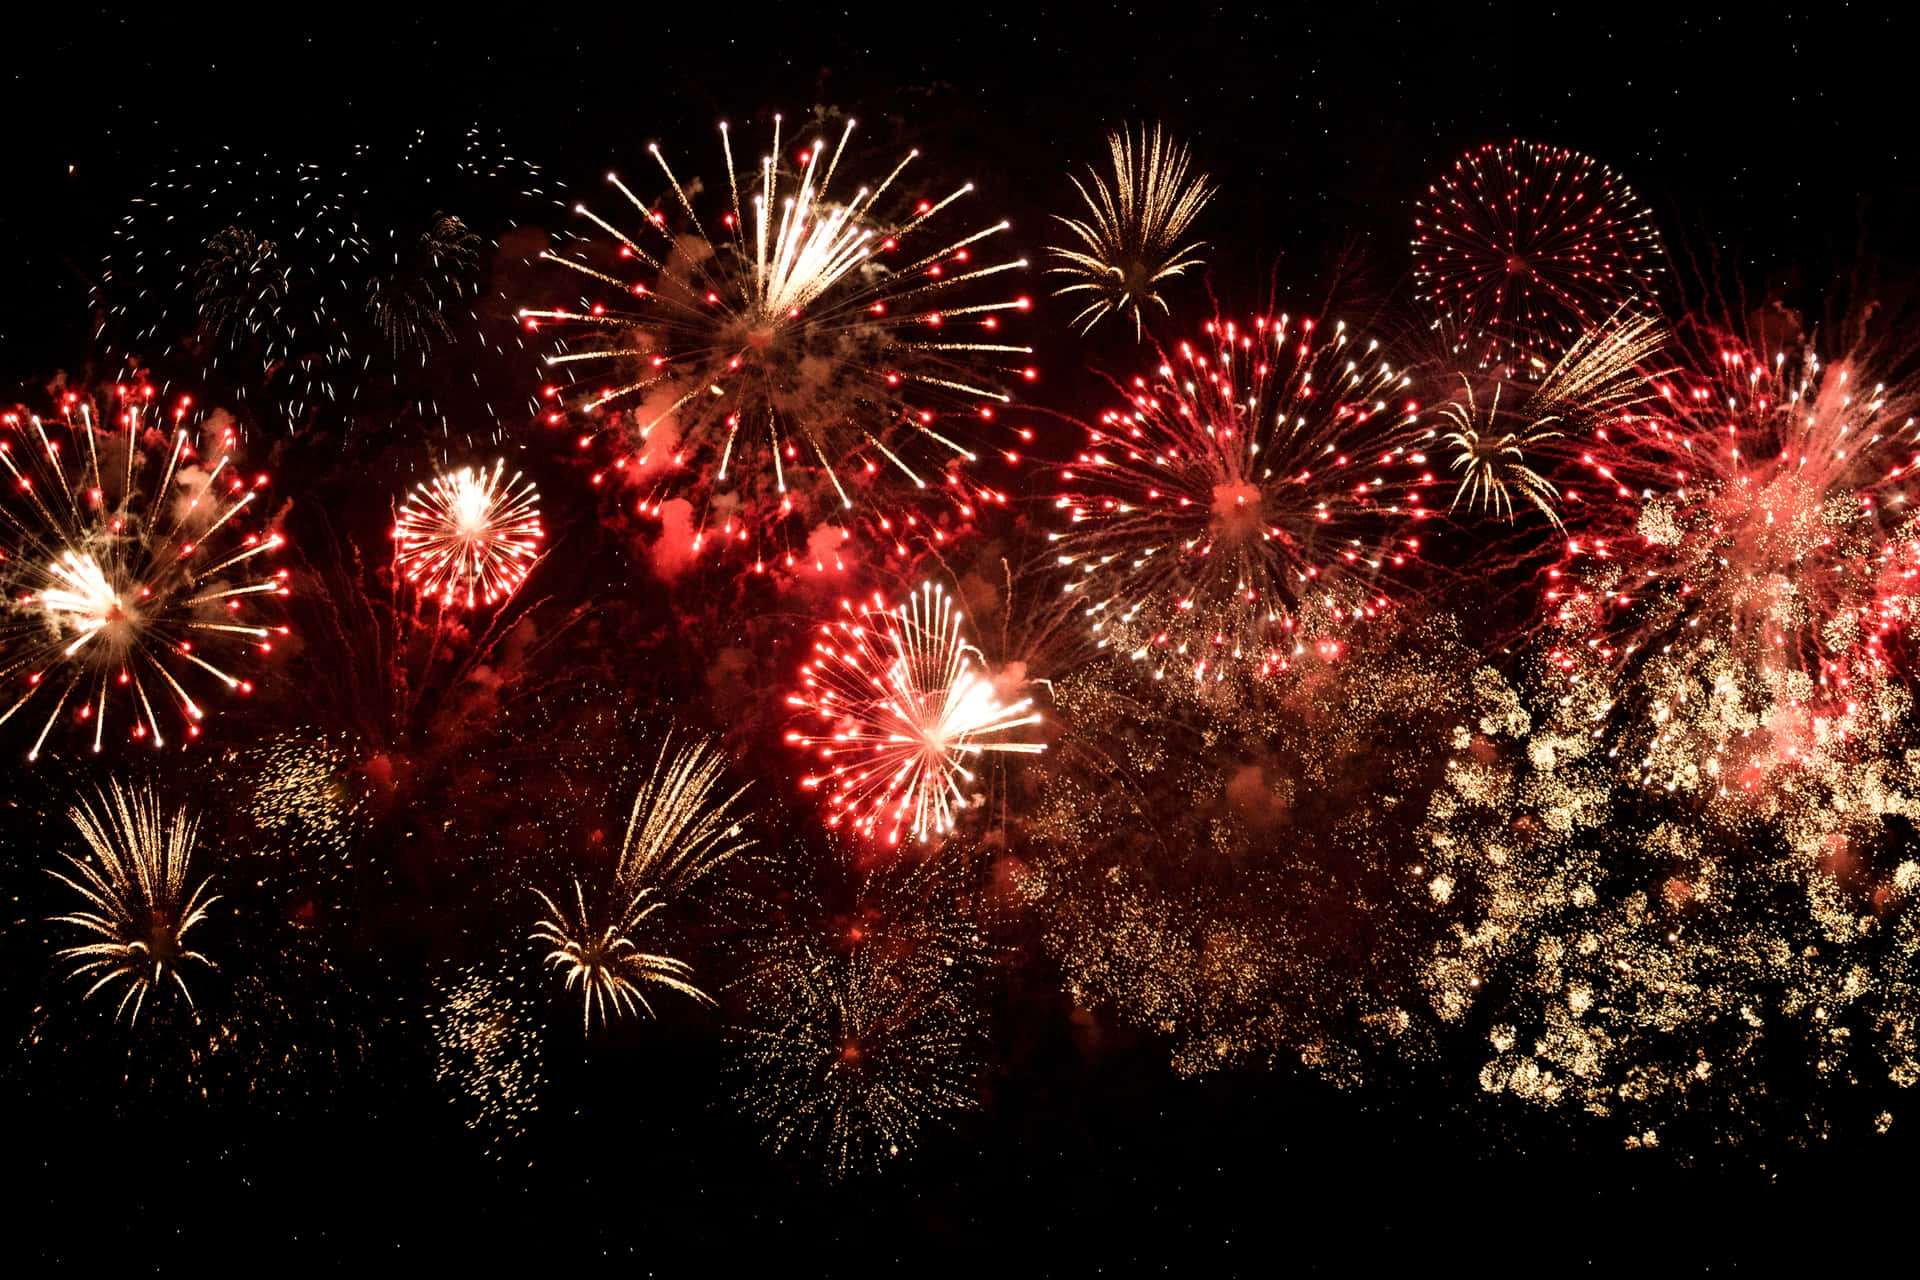 "Celebrate the night sky with a show of dazzling fireworks"